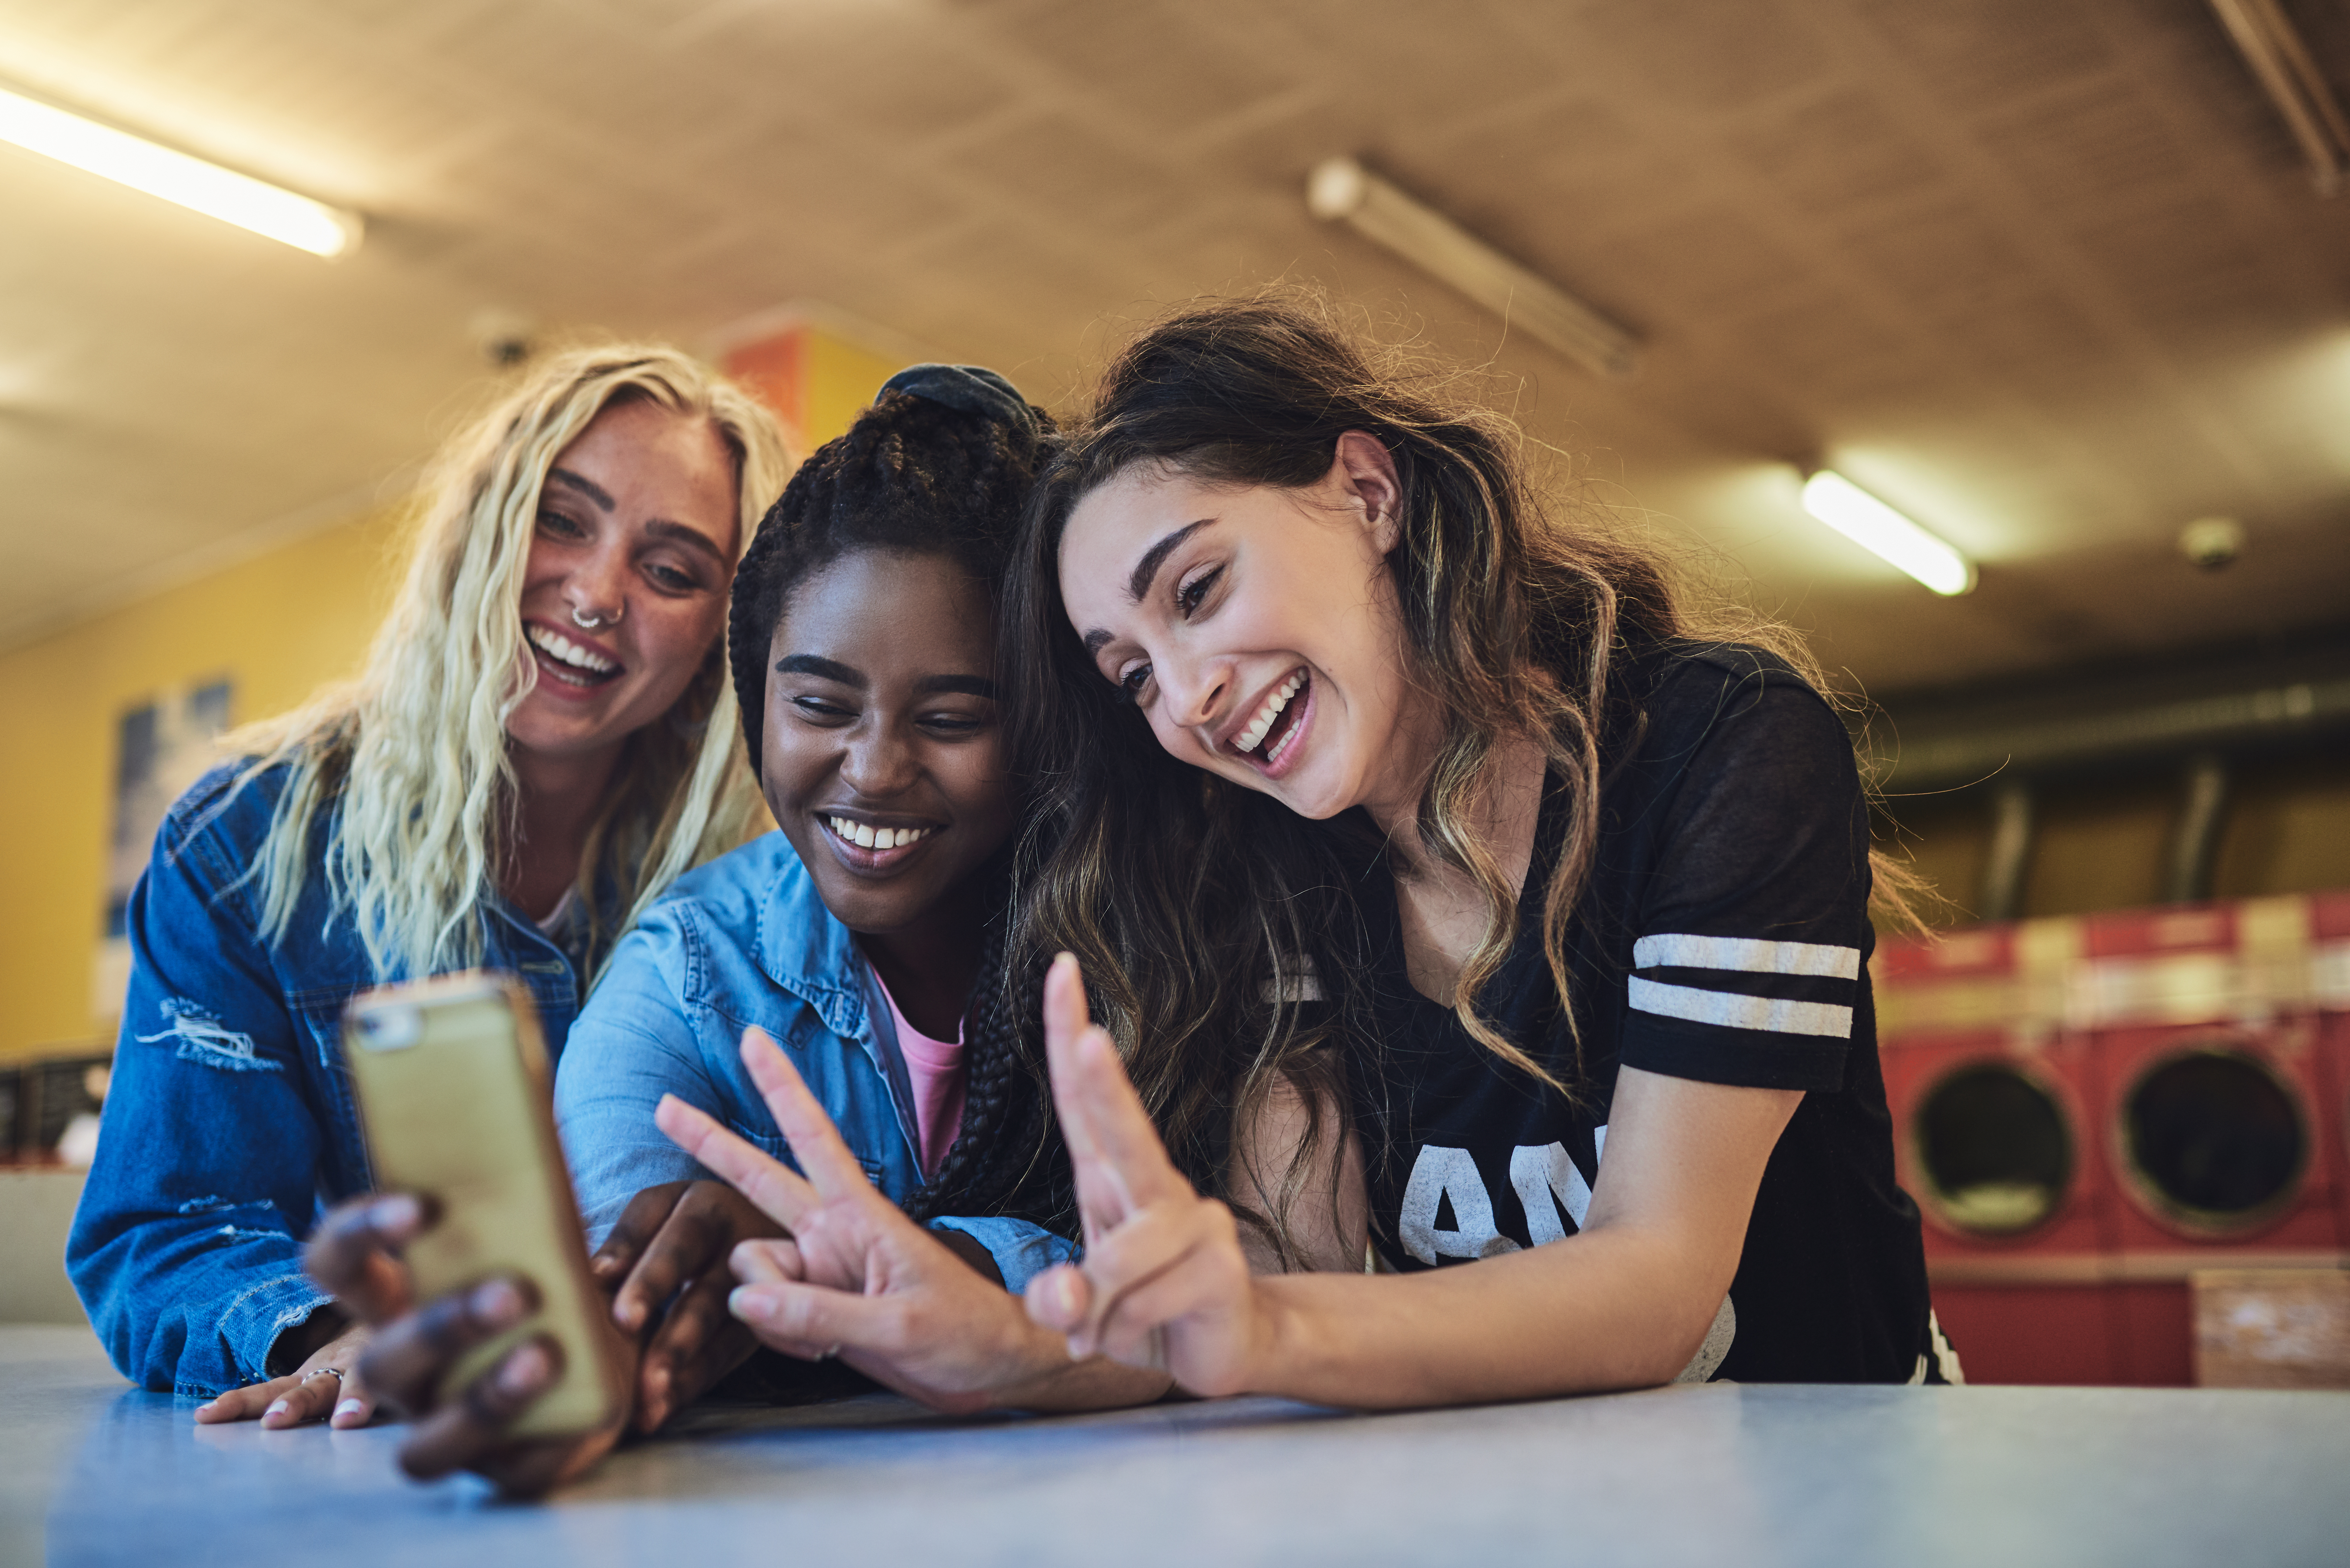 Three girls laughing while taking a selfie